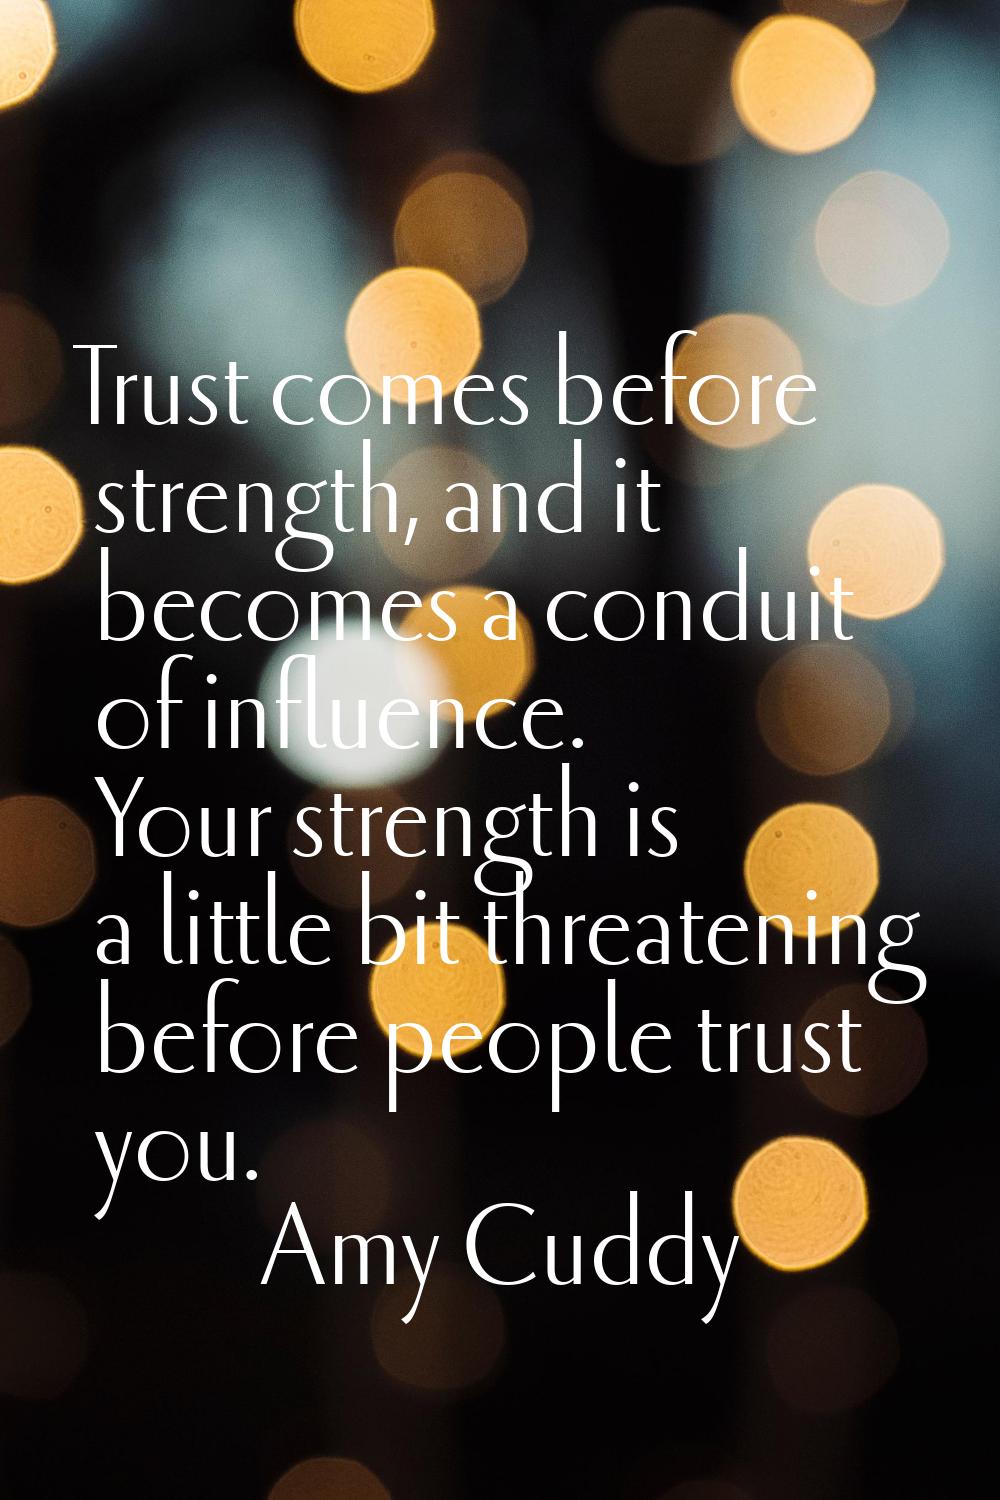 Trust comes before strength, and it becomes a conduit of influence. Your strength is a little bit t